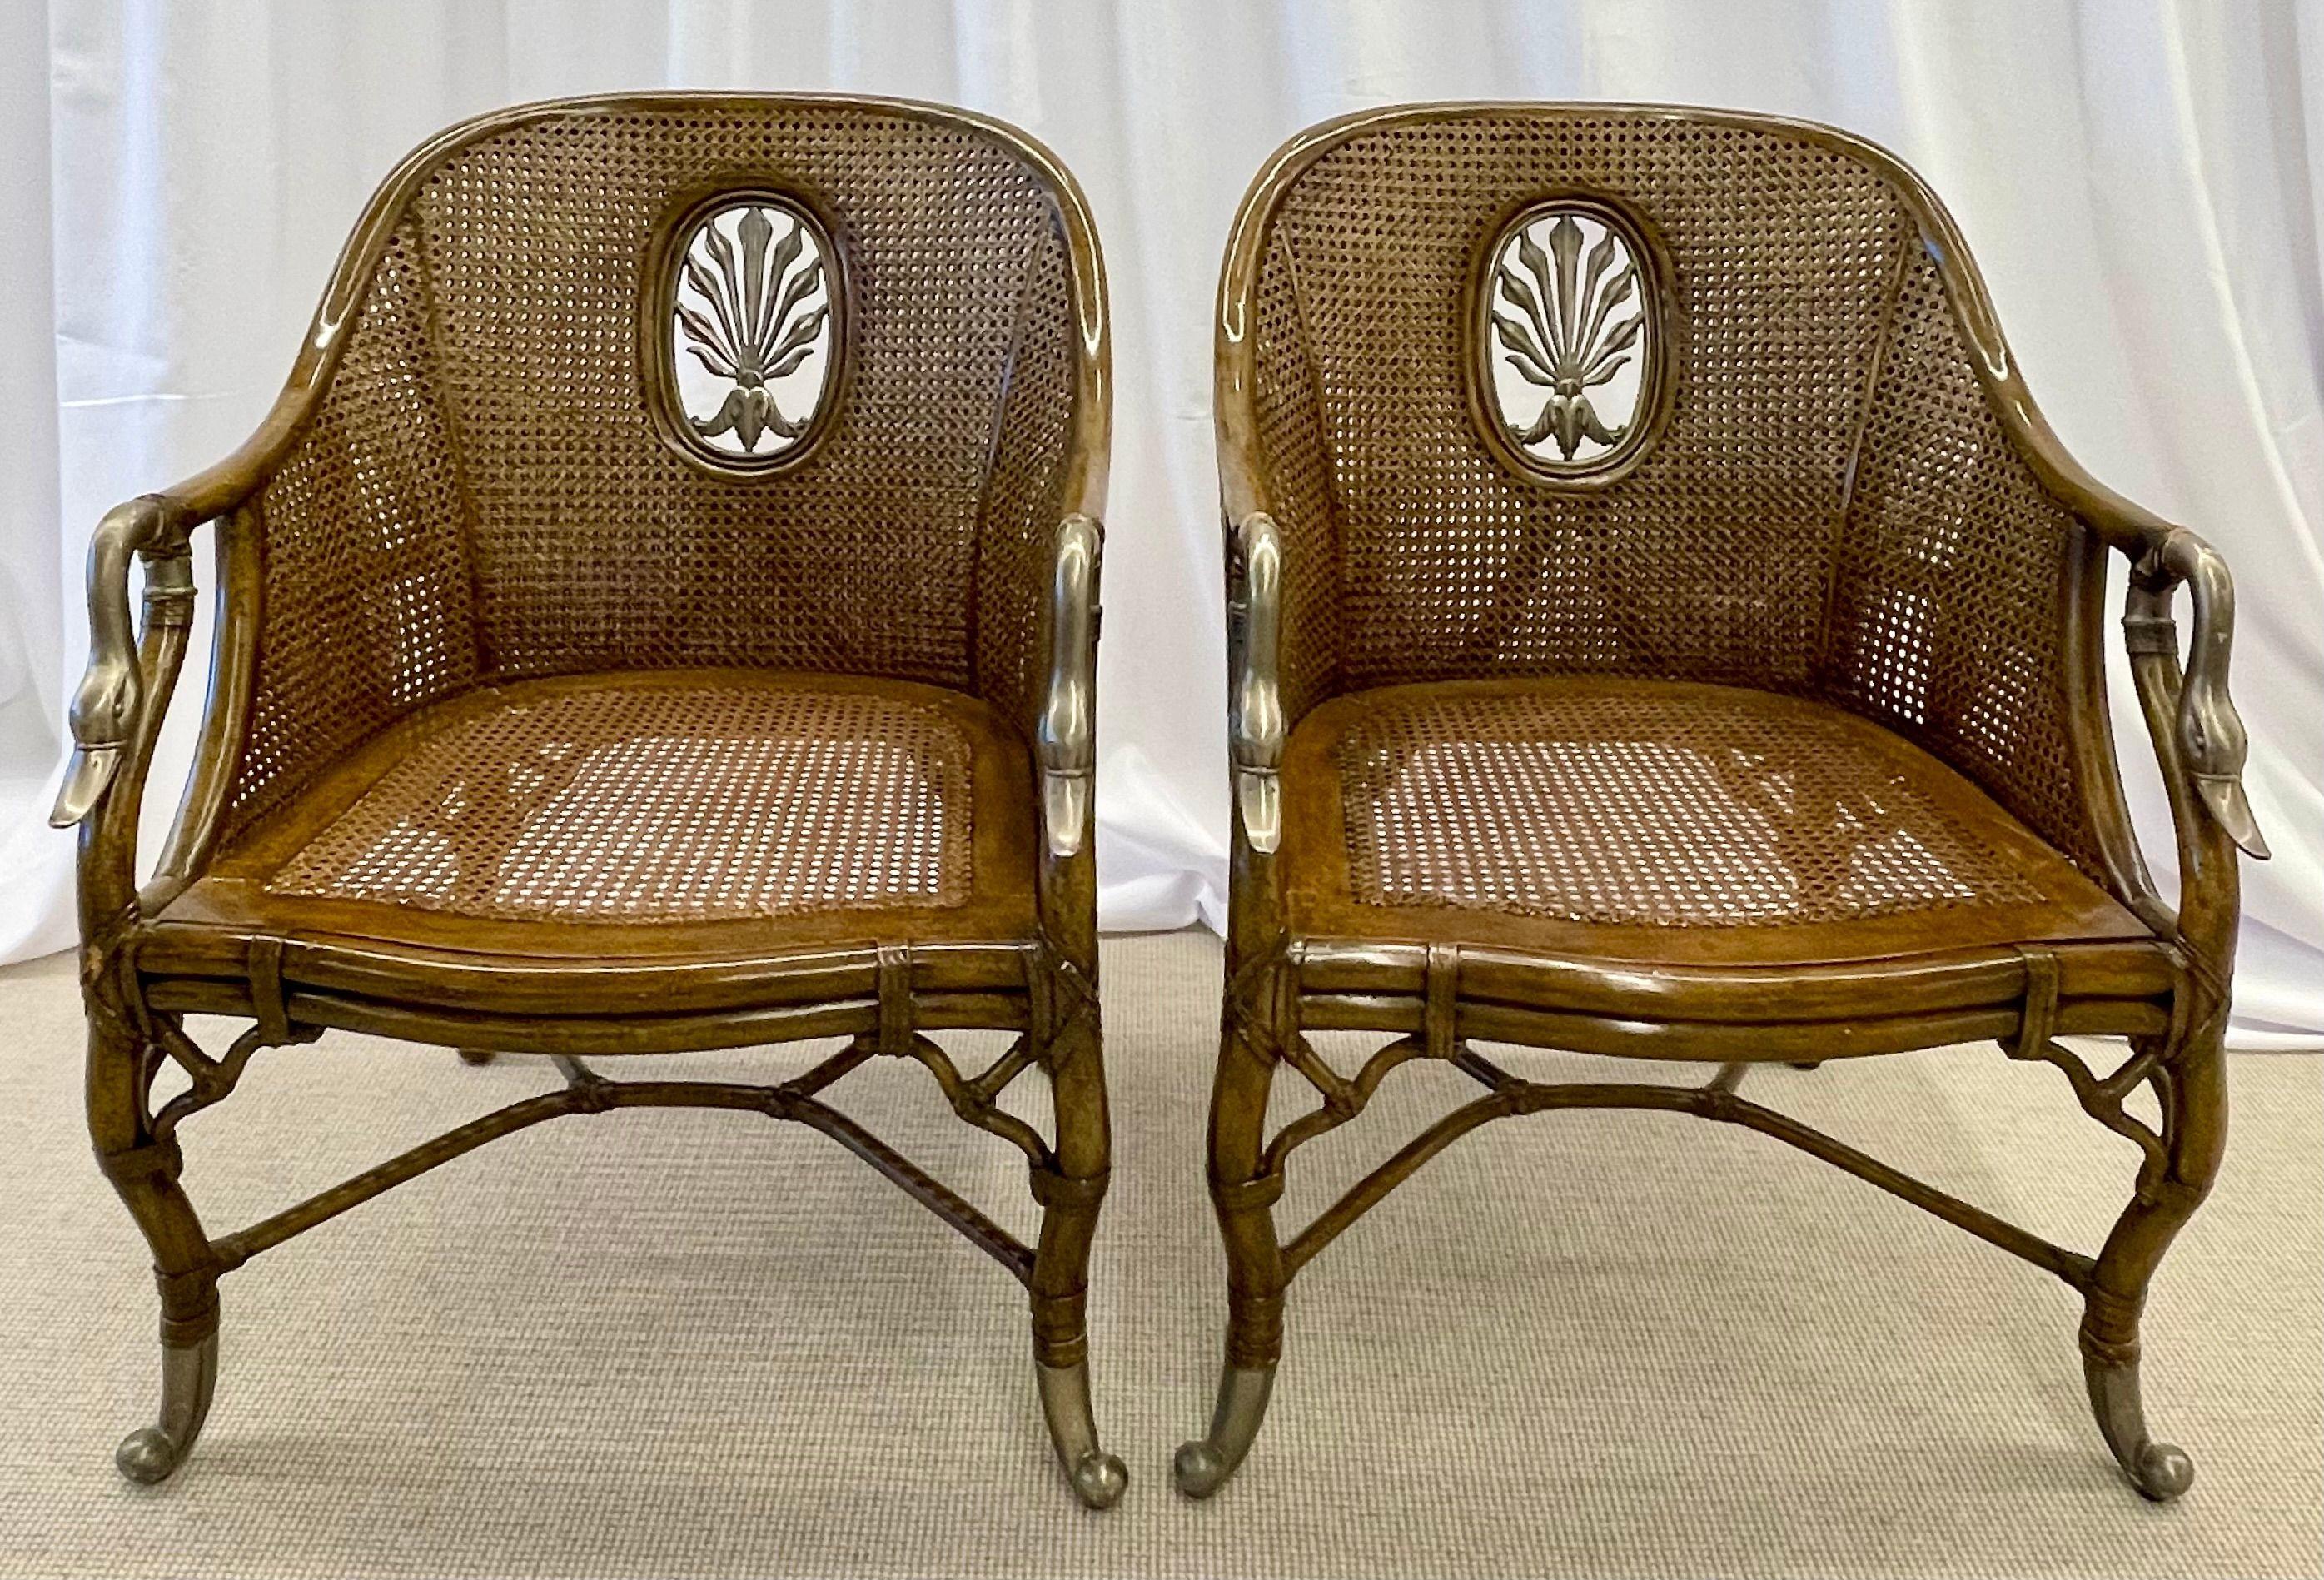 Pair of French Bergère Swan Arm, Lounge, Side Chairs, Silver Metal Cast, Cane. Each in a faux bamboo tortoise shell painted frame of double caning with silver gilt metal Swan Form had rests. The backrests with fleur de lis silver metal design. The